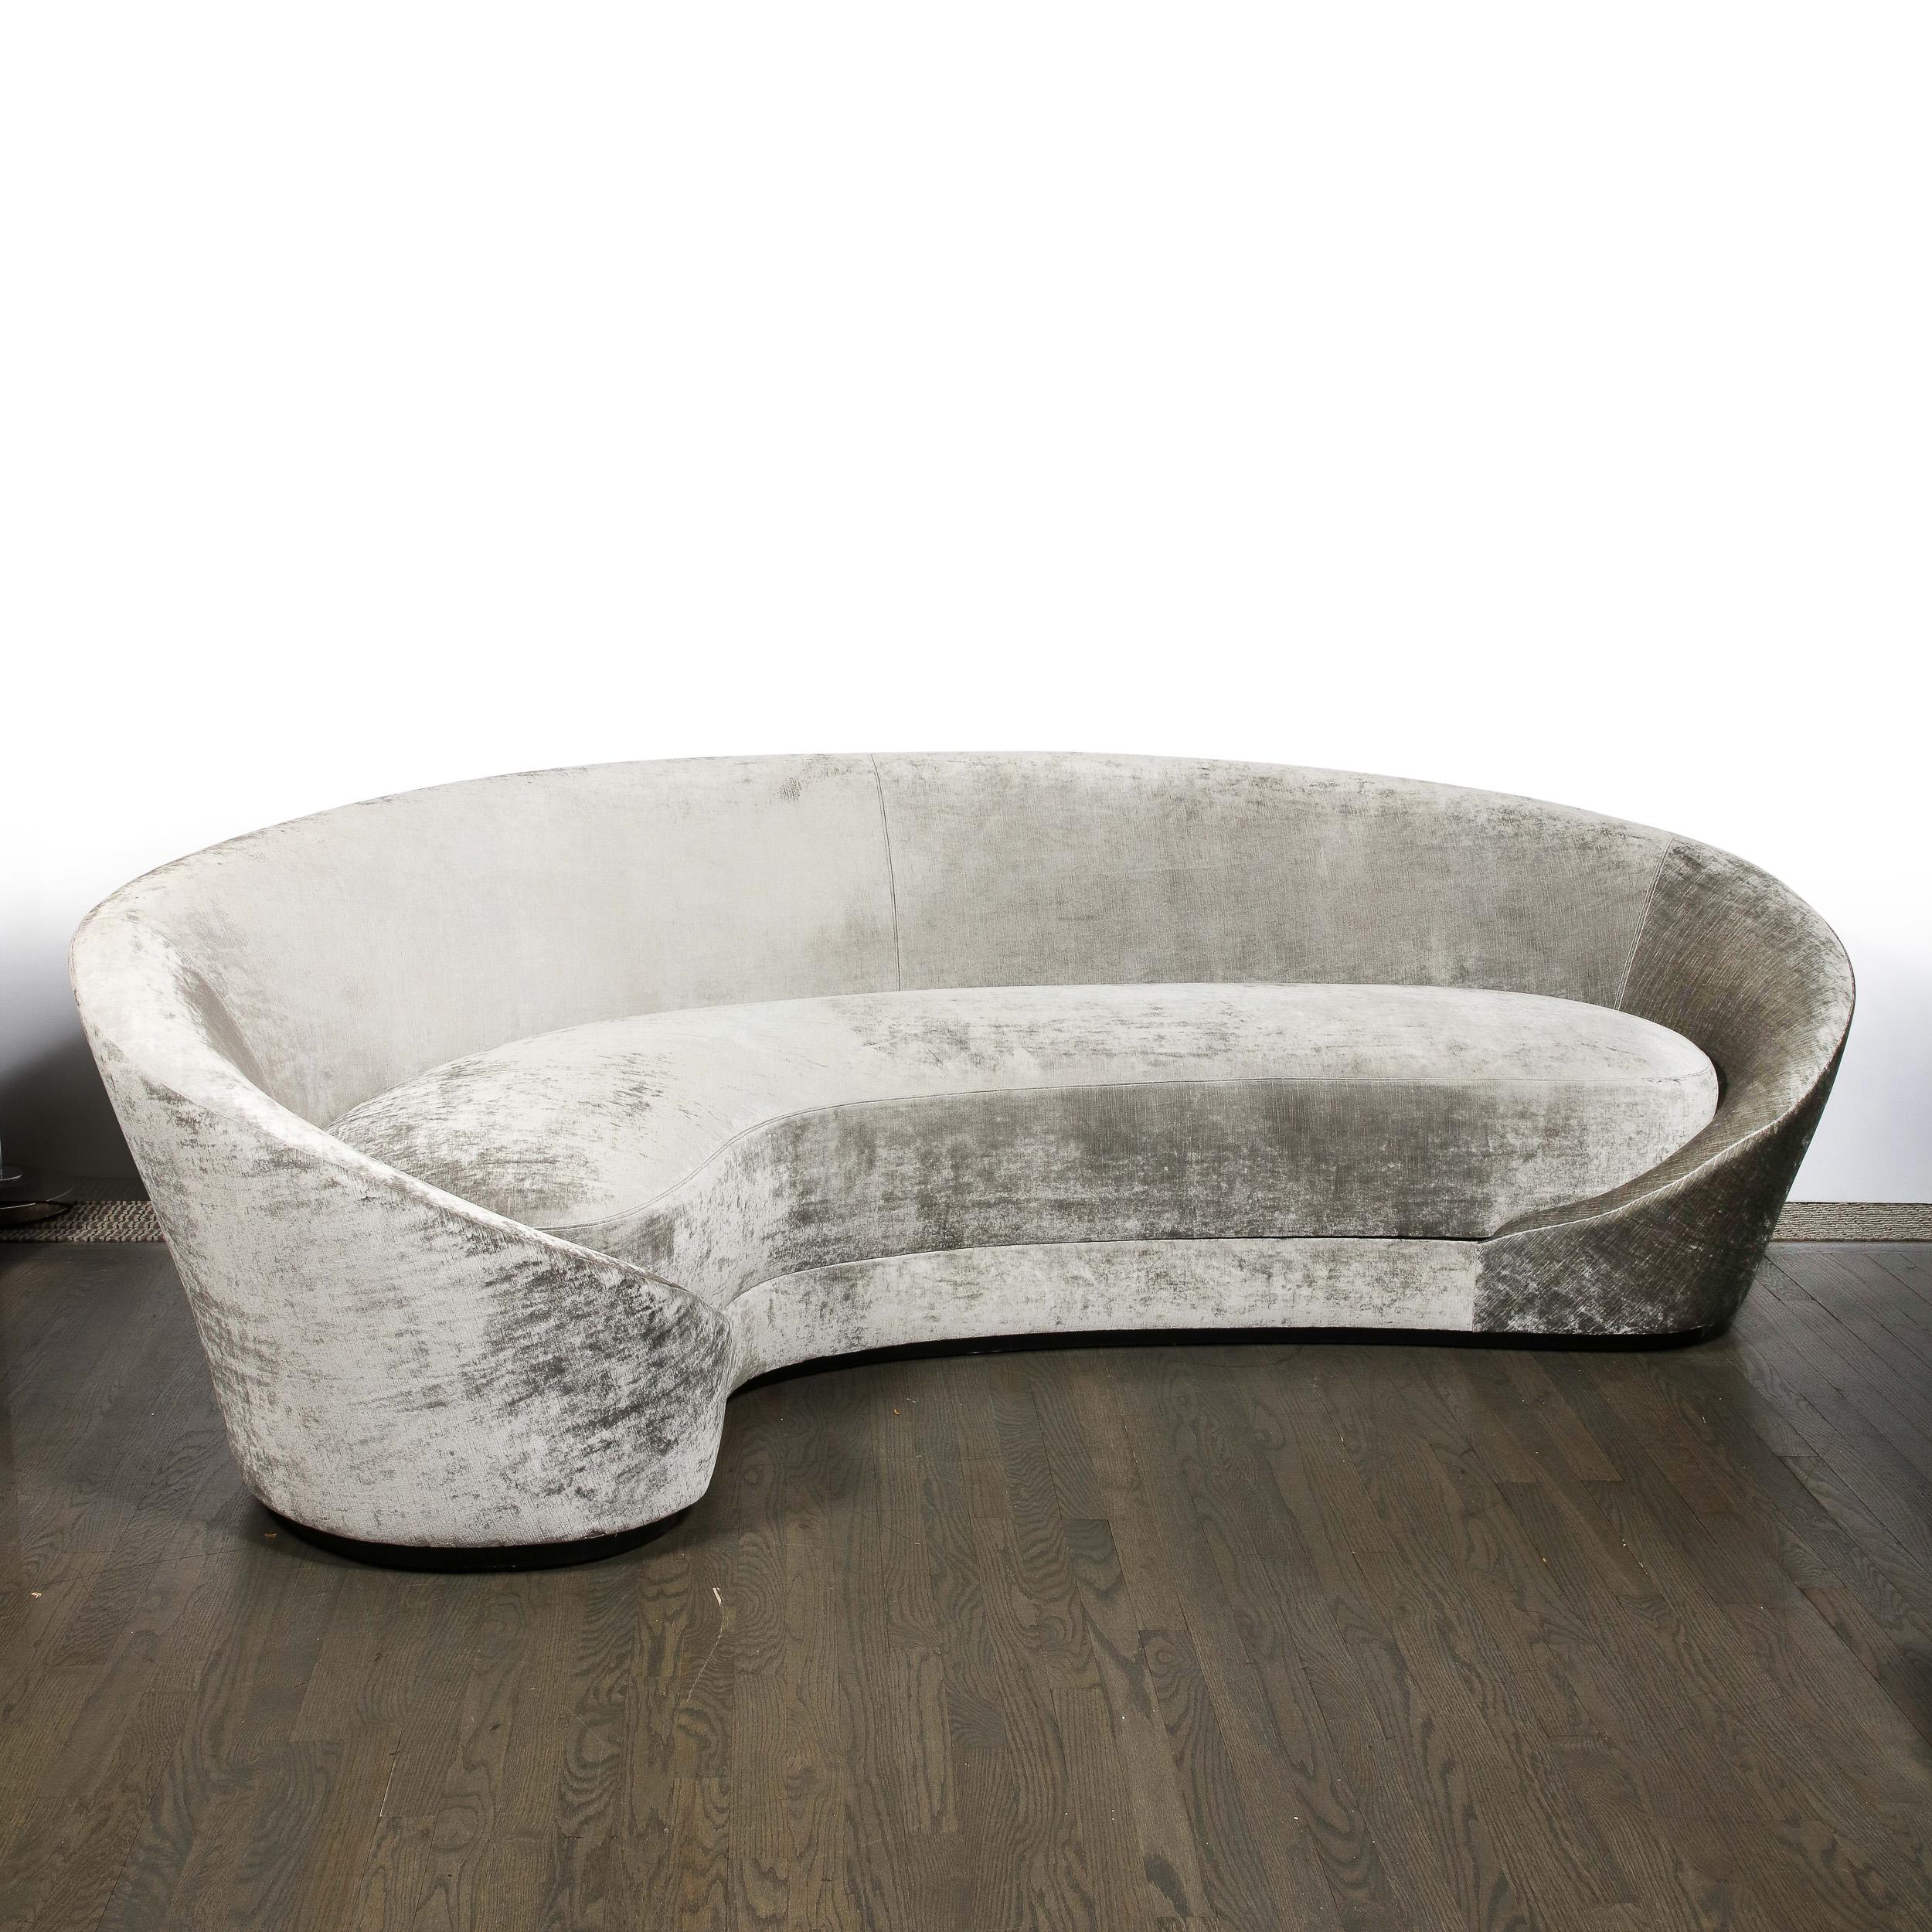 1940s Style Modernist Sweeping Curved Sofa in Platinum Velvet For Sale 6